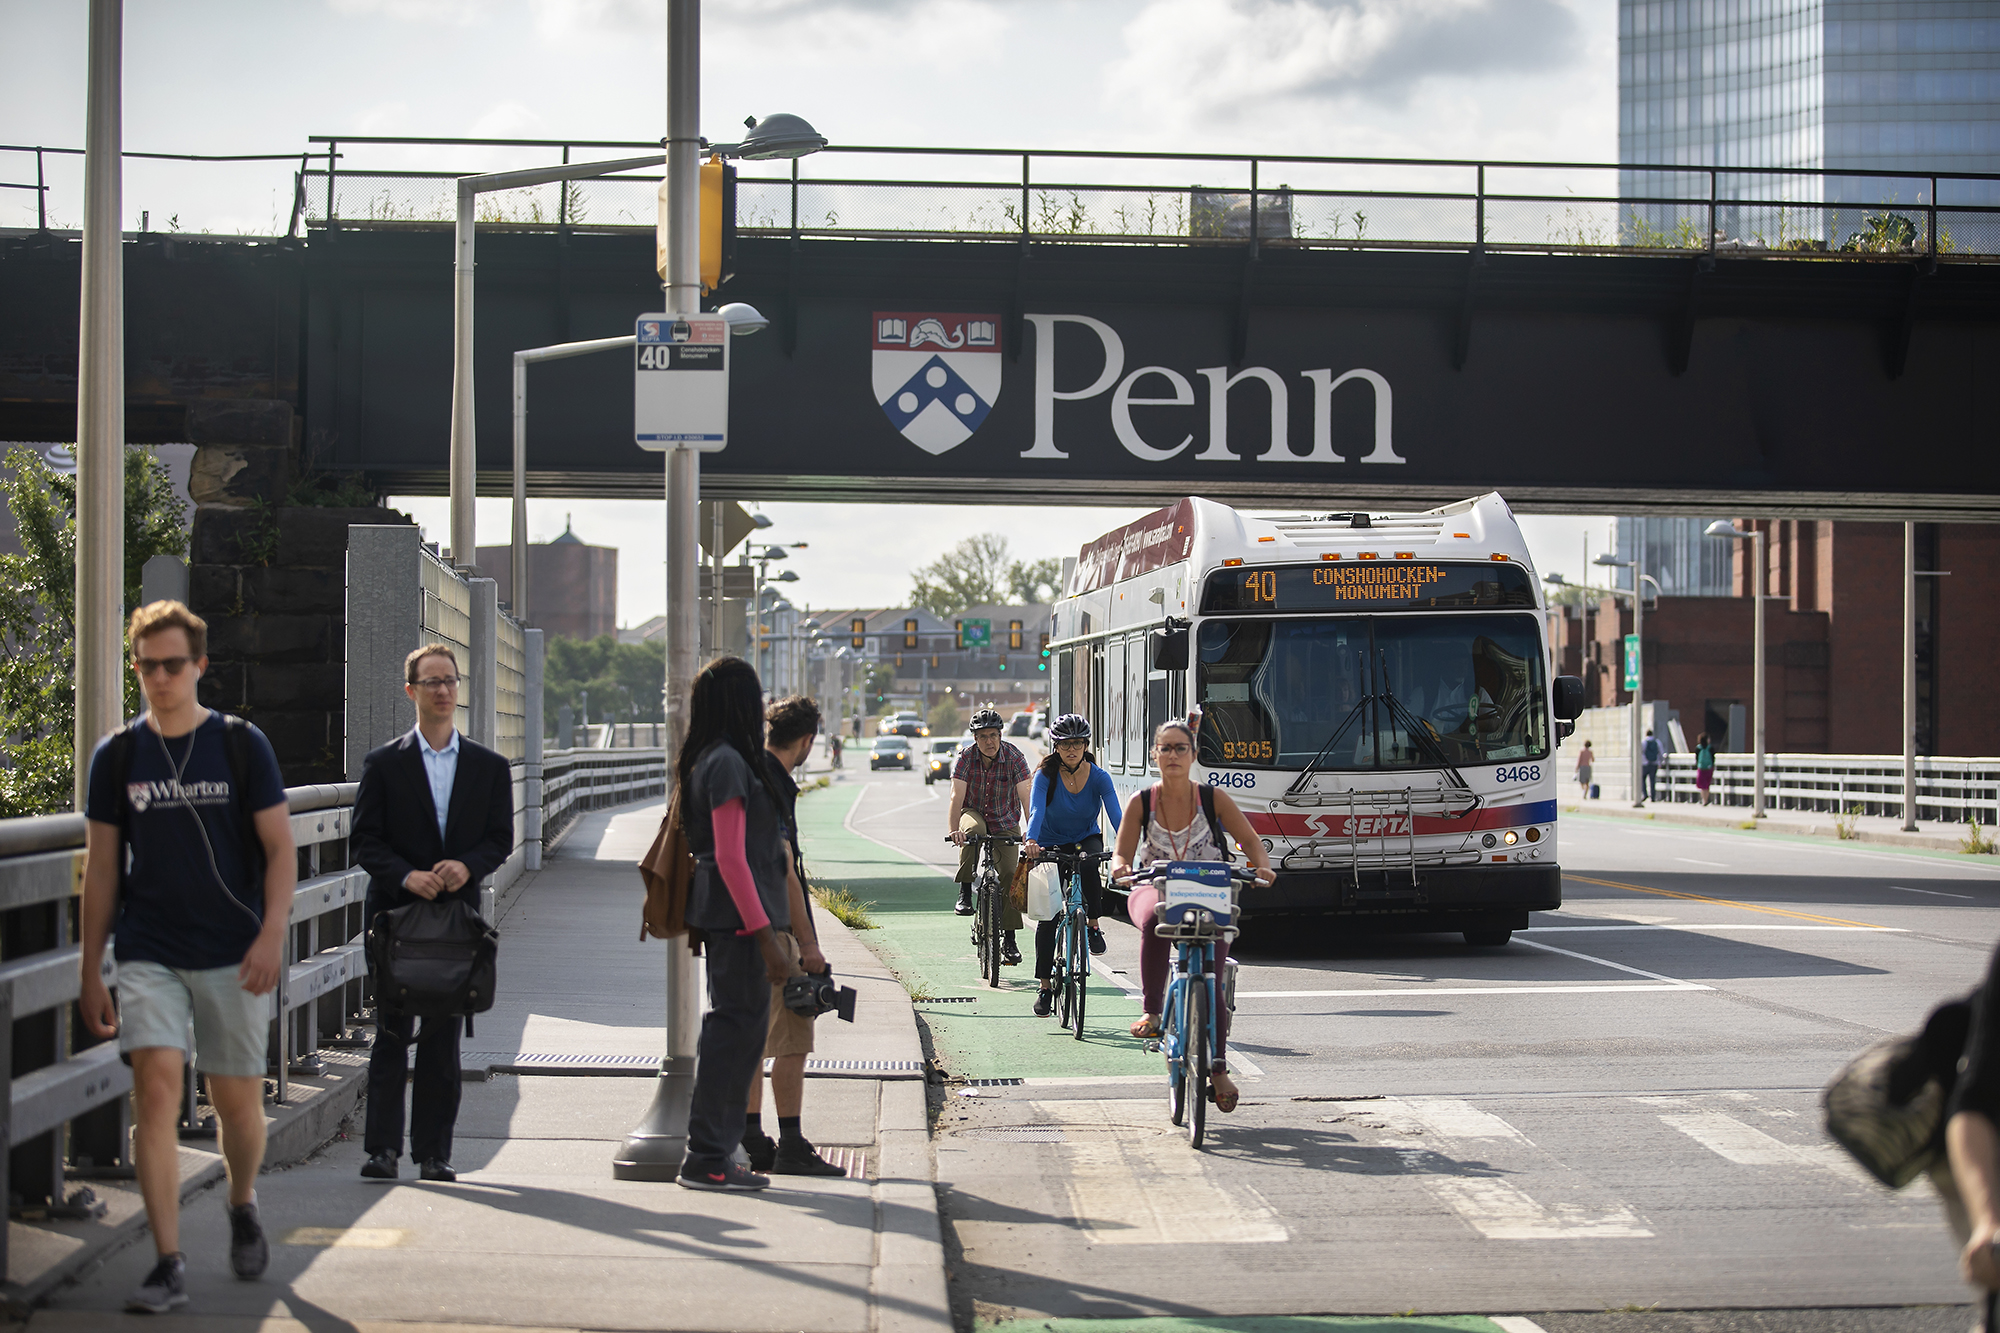 Pedestrians on the sidewalk, bikers in the bike lane, and a Septa bus in the street.